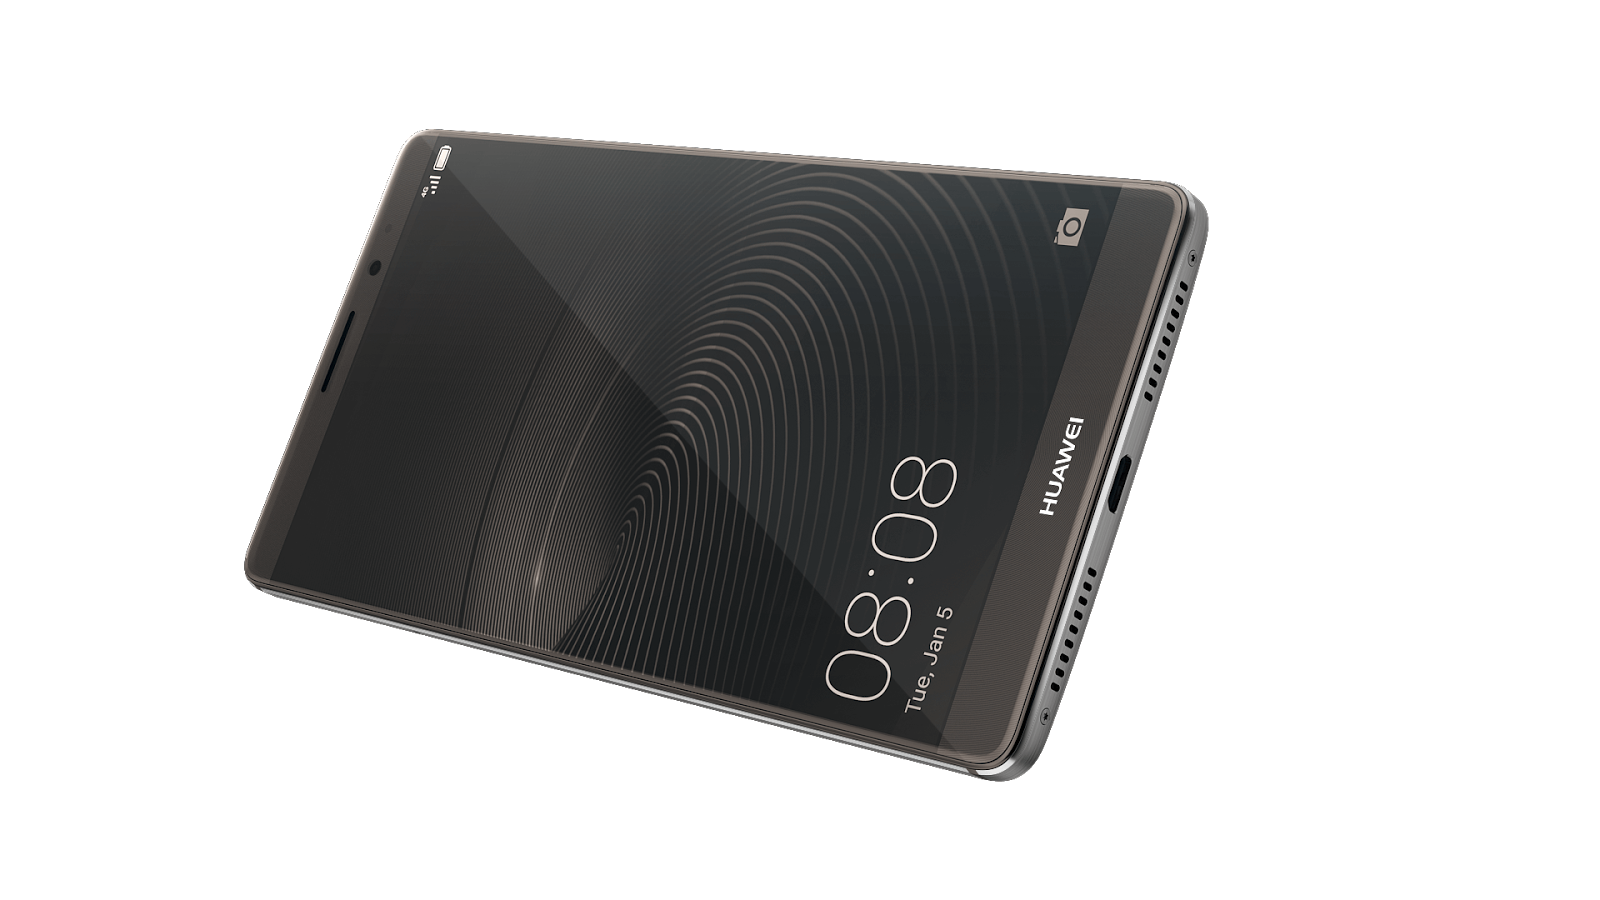 Huawei Mate 8 pictures, official photos